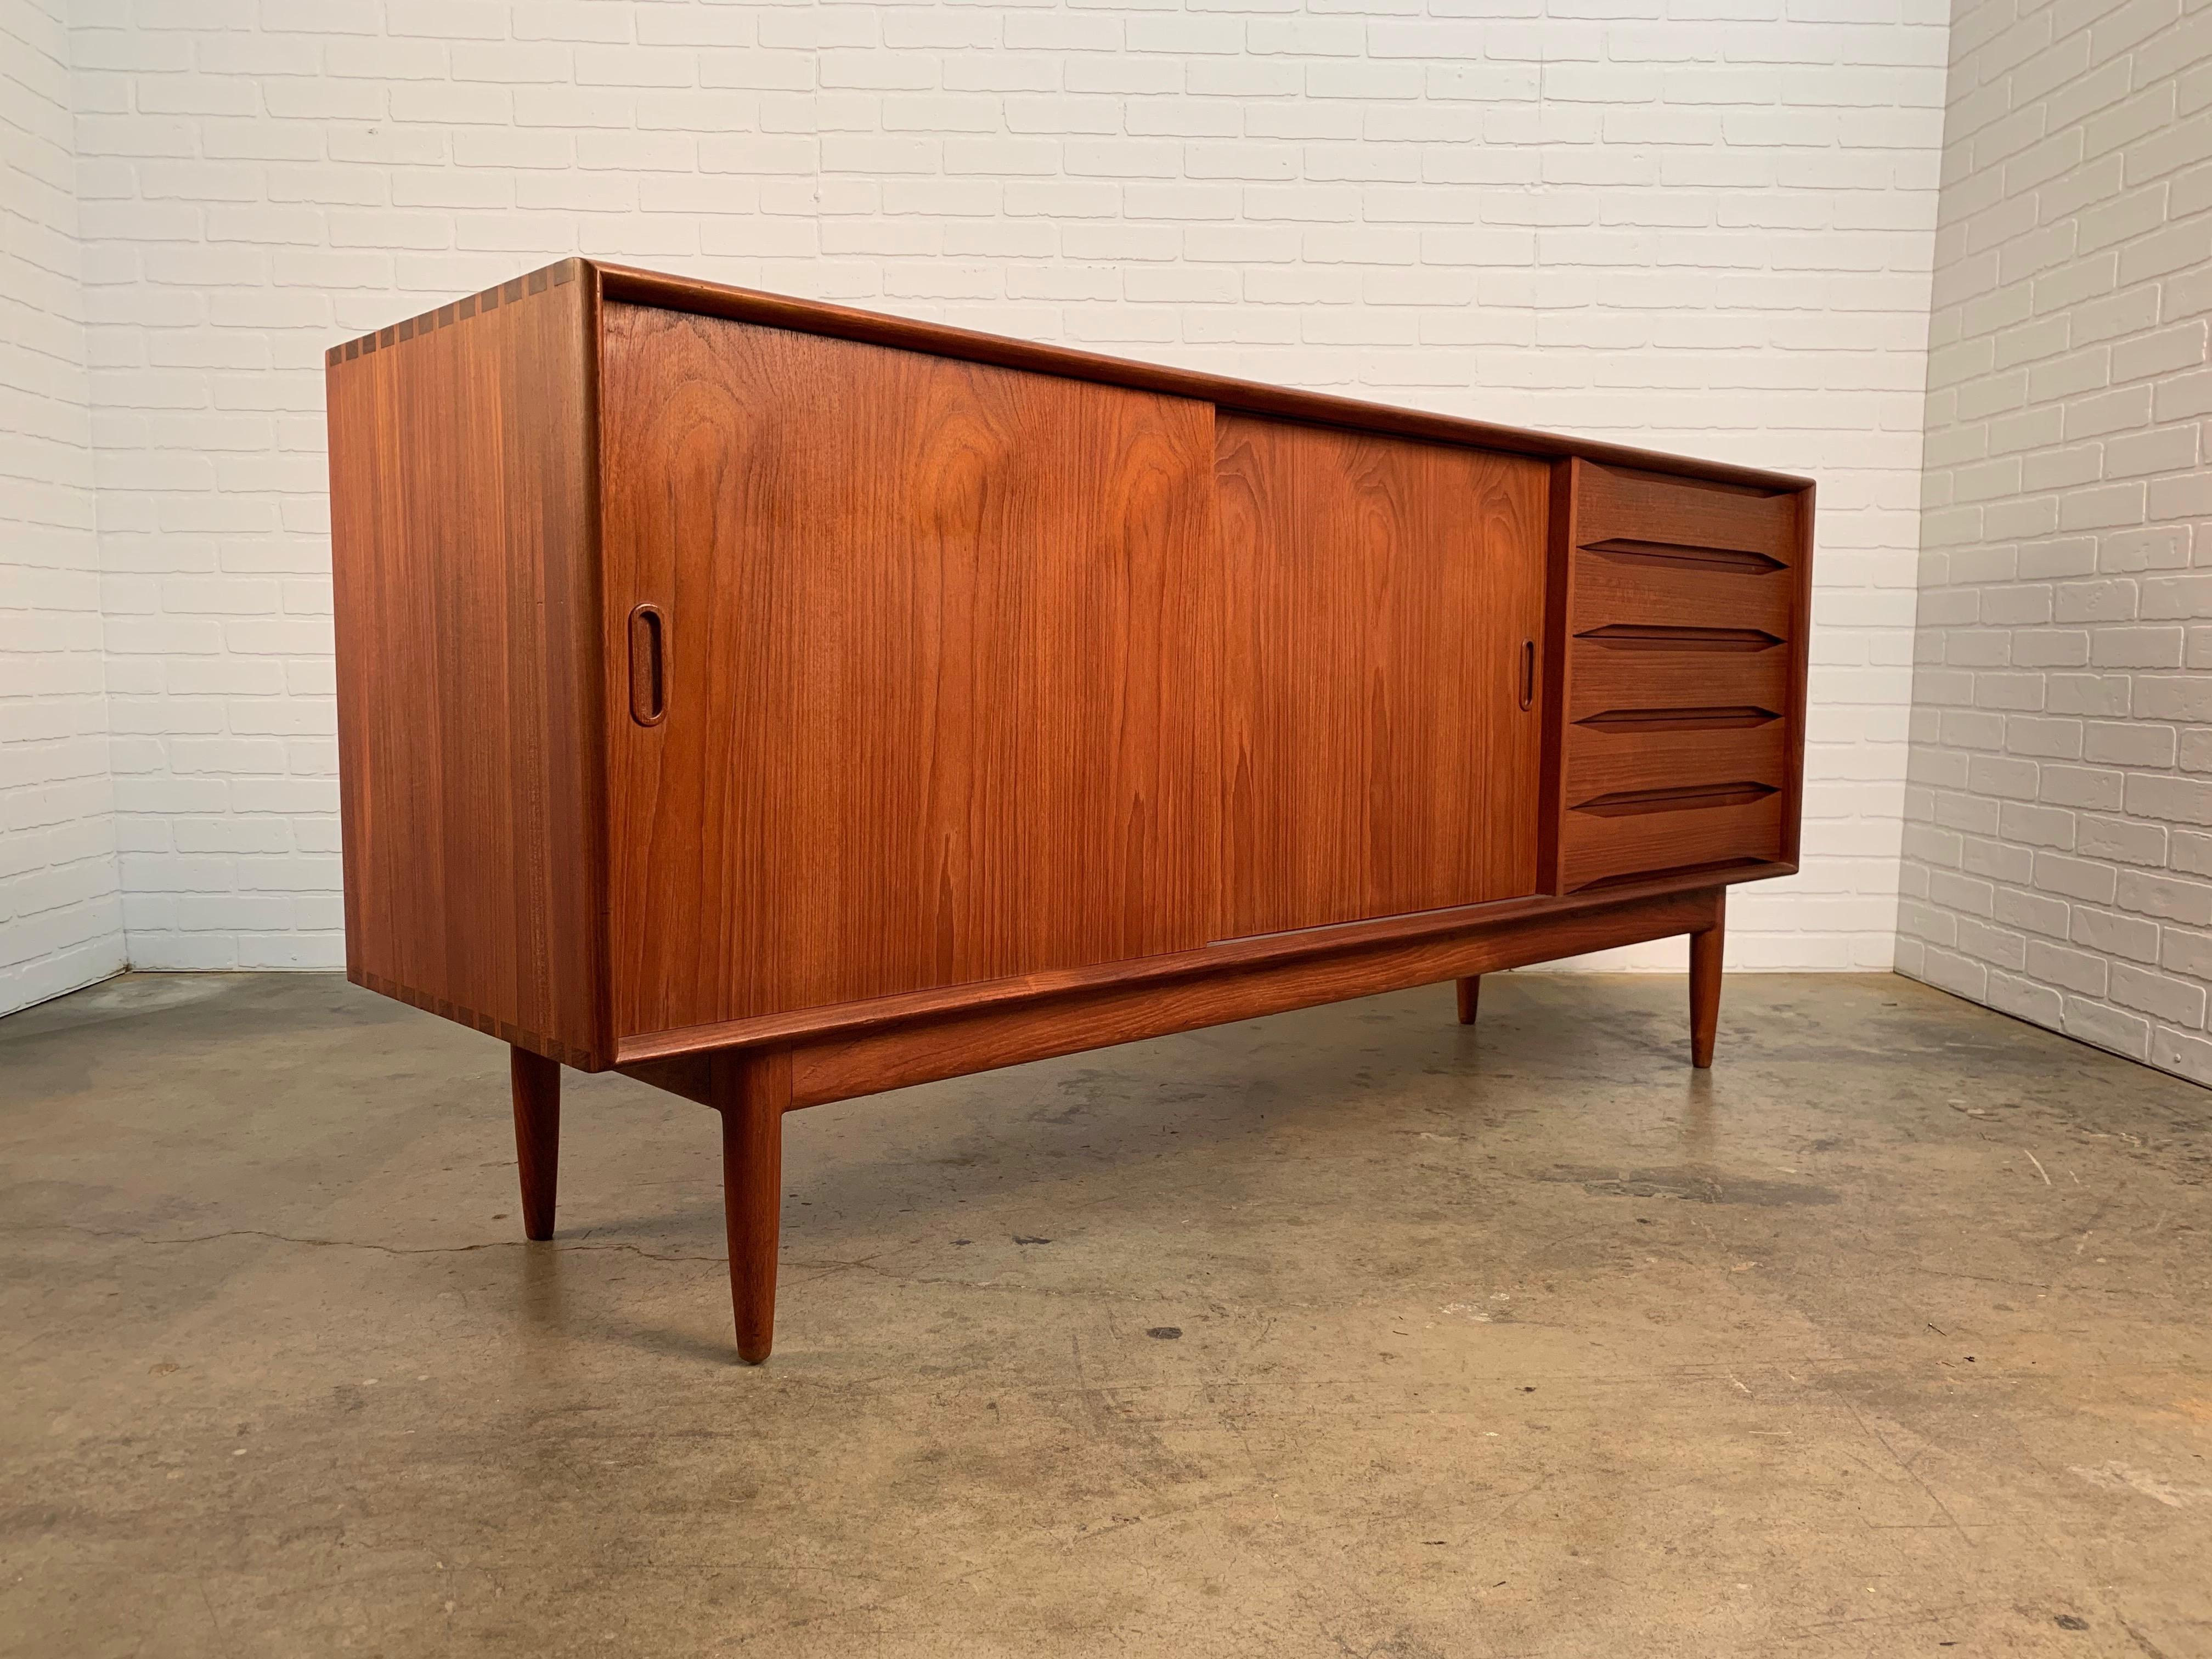 Danish modern solid teak credenza by Johannes Aasbjerg with dovetailed corners on the case and drawers
also two sliding doors that have adjustable shelves inside. The back of the cabinet is finished so it can be floated in a room. Please see